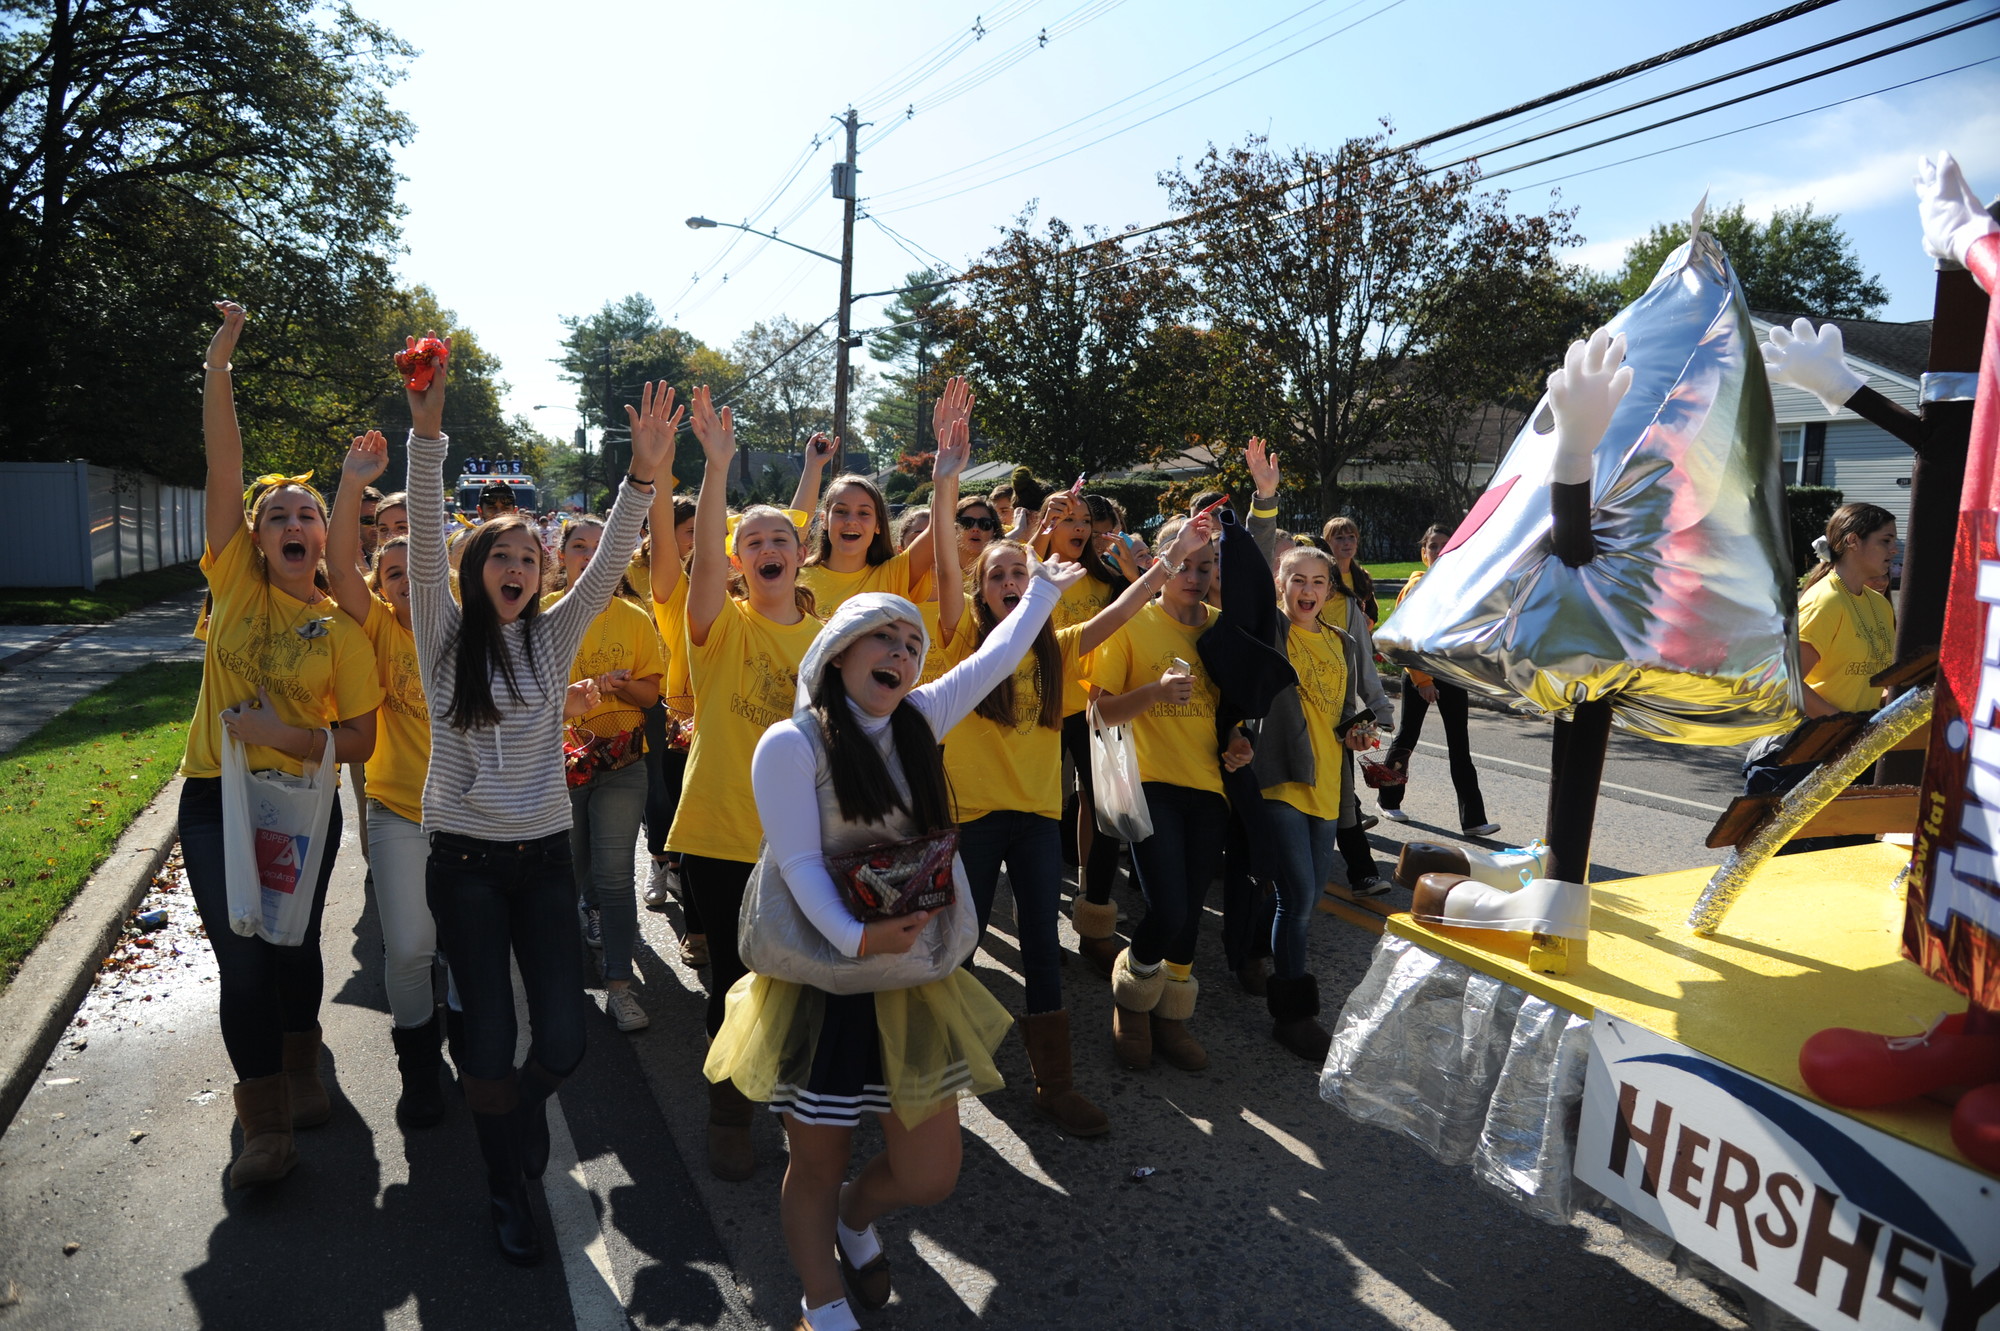 South Side High School students showed their colors on Saturday for Homecoming, marching through the streets to cheer on the football team, which went on to defeat Great Neck North, 38-0.